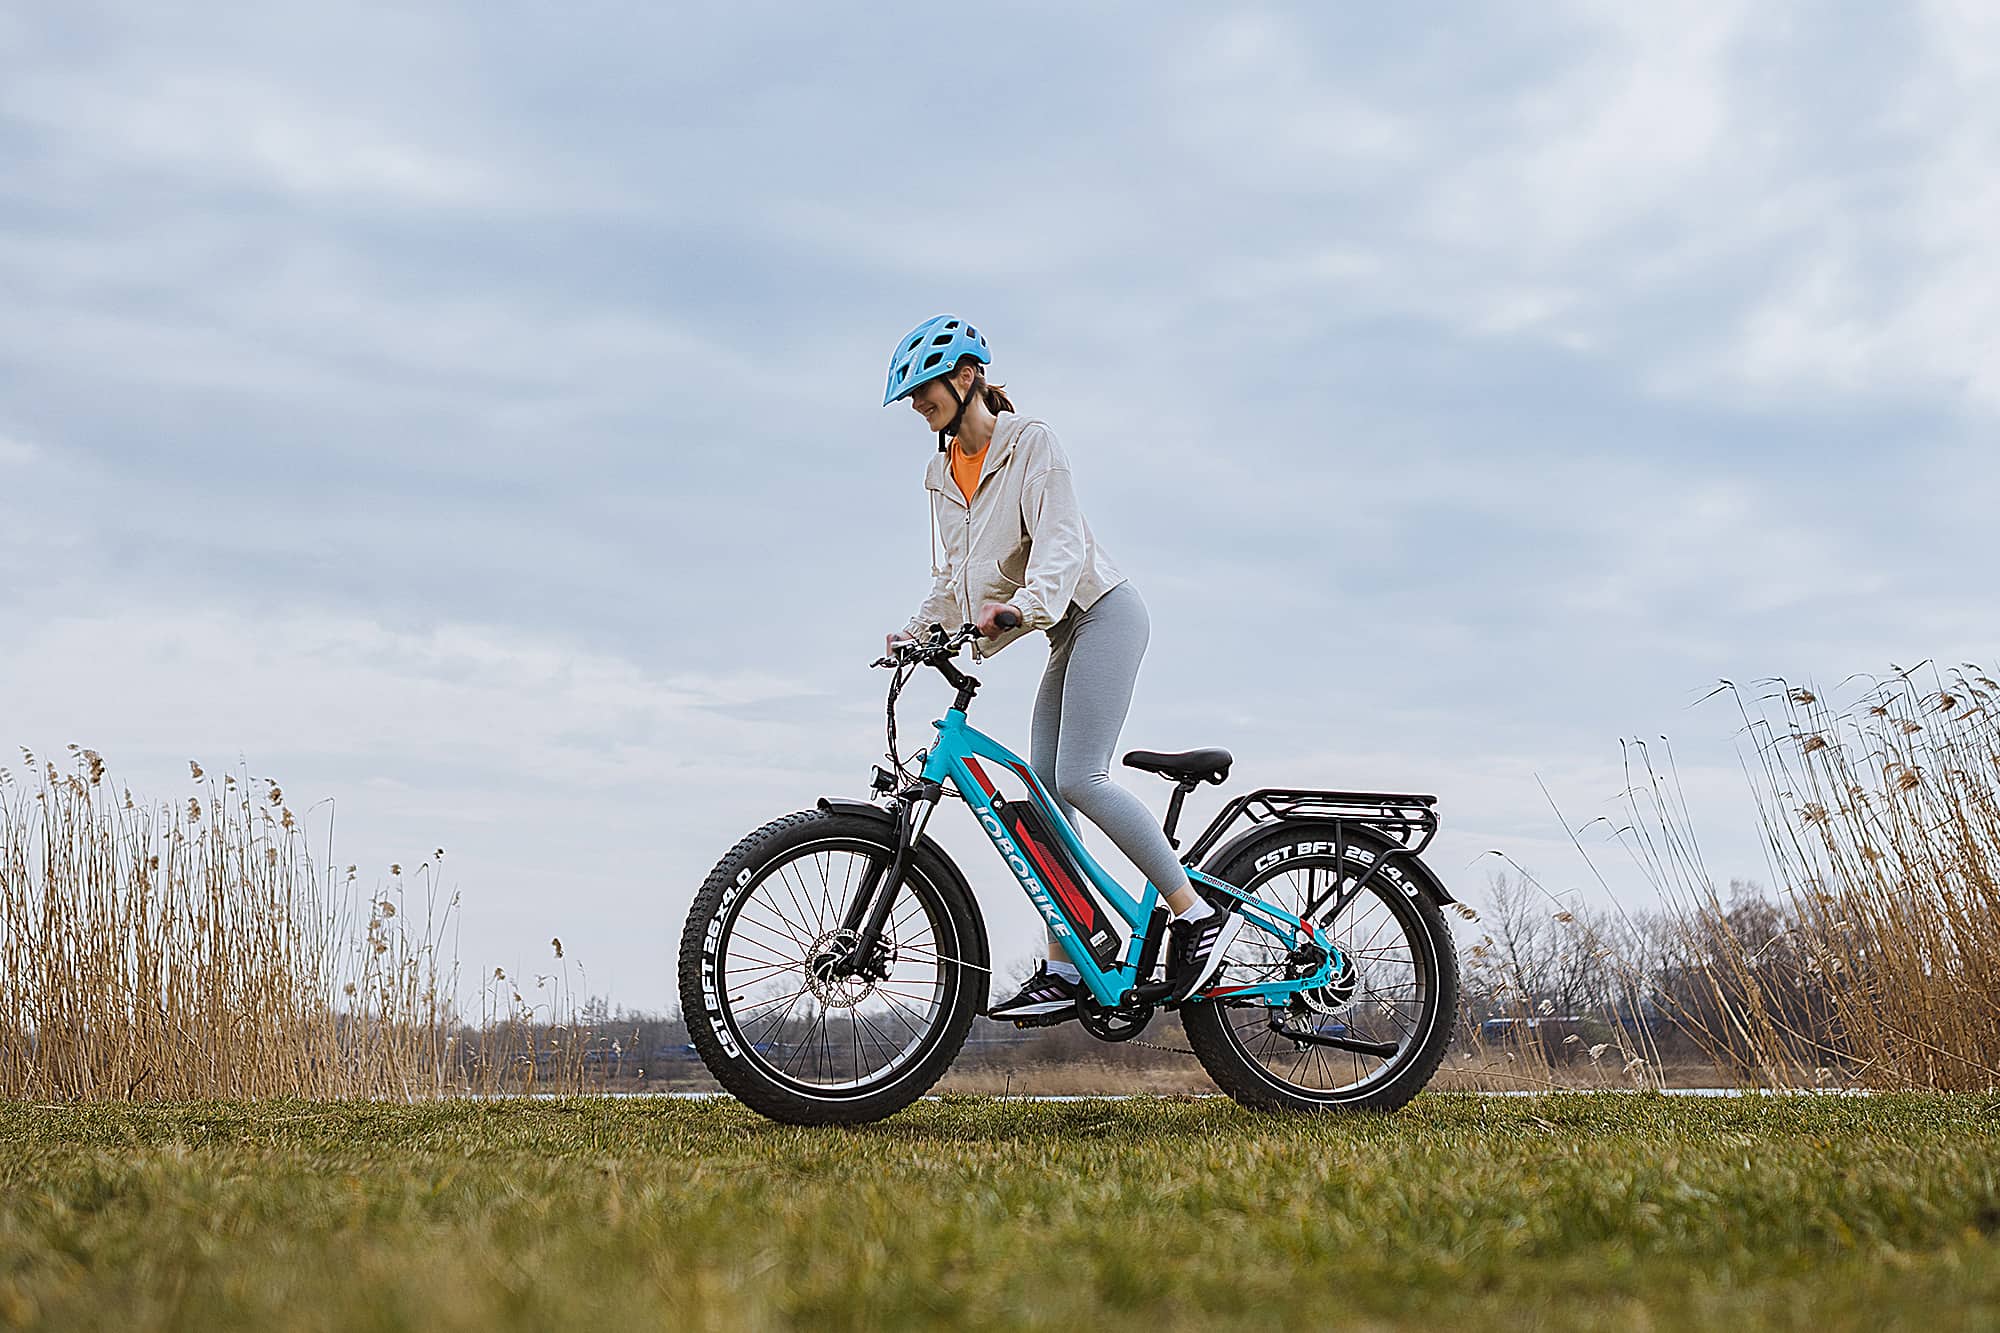 How Far Can a Electric Bike Go on a Full Battery?